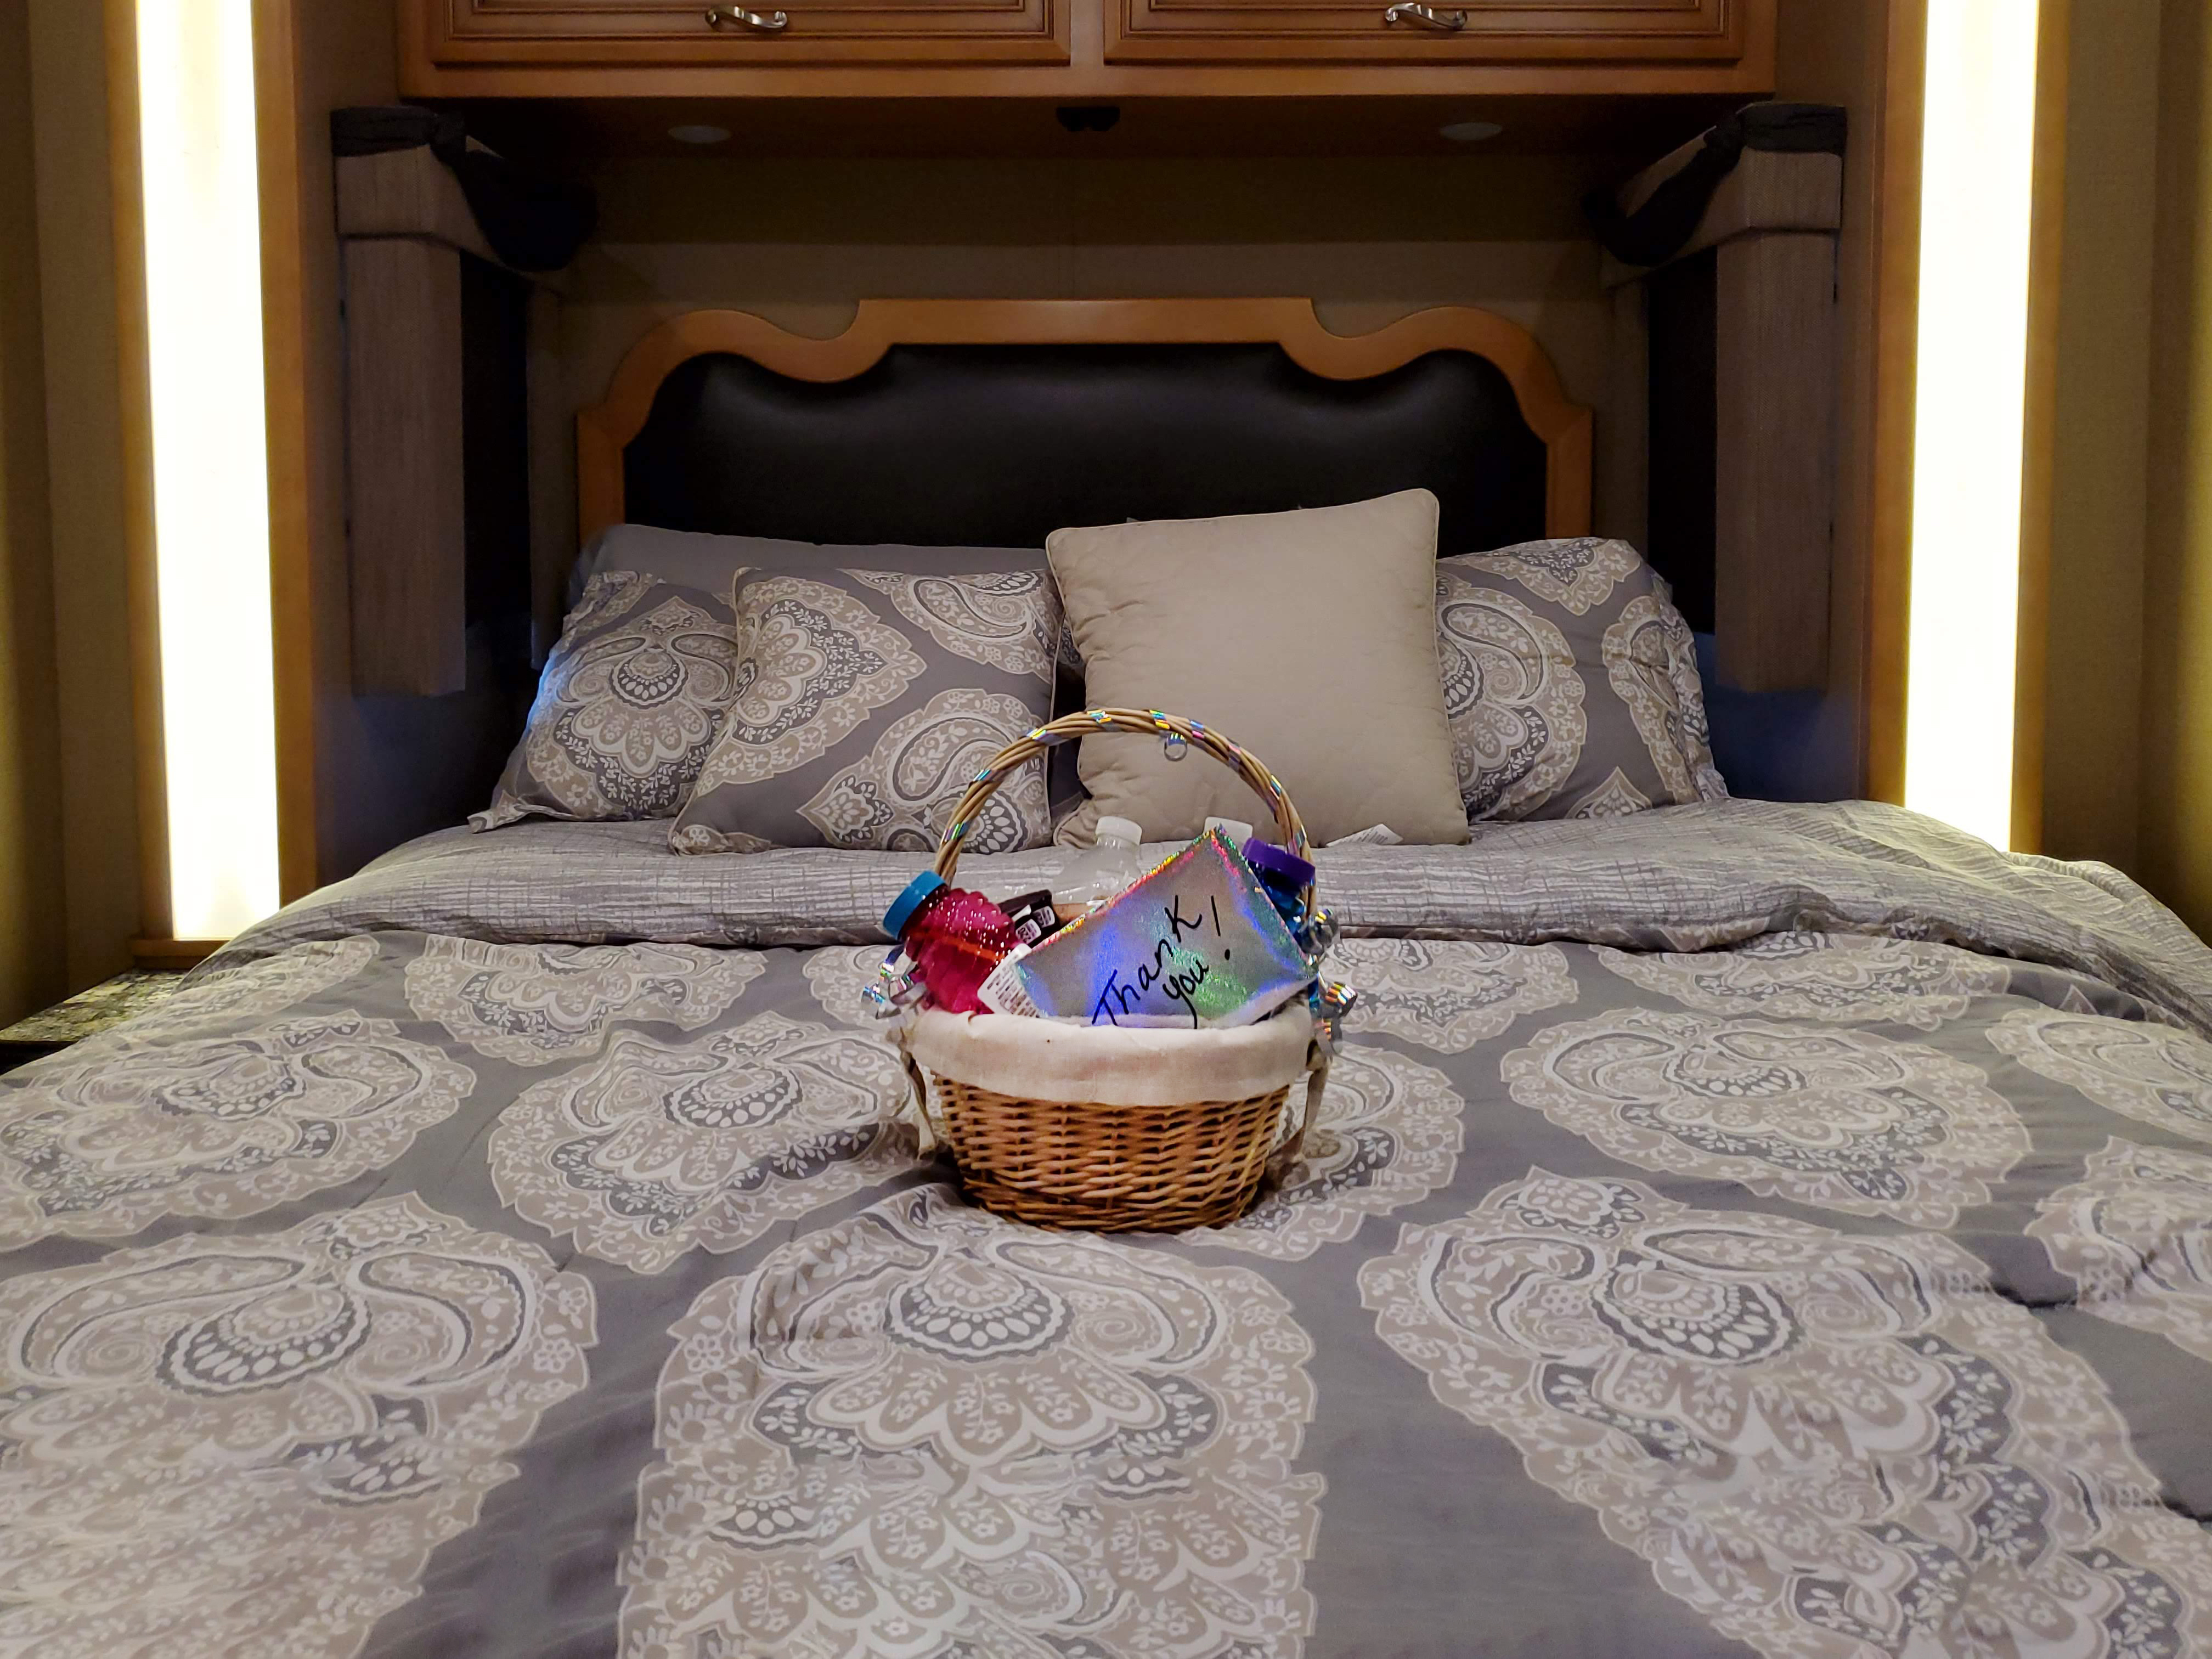 Gift basket for renters on bed